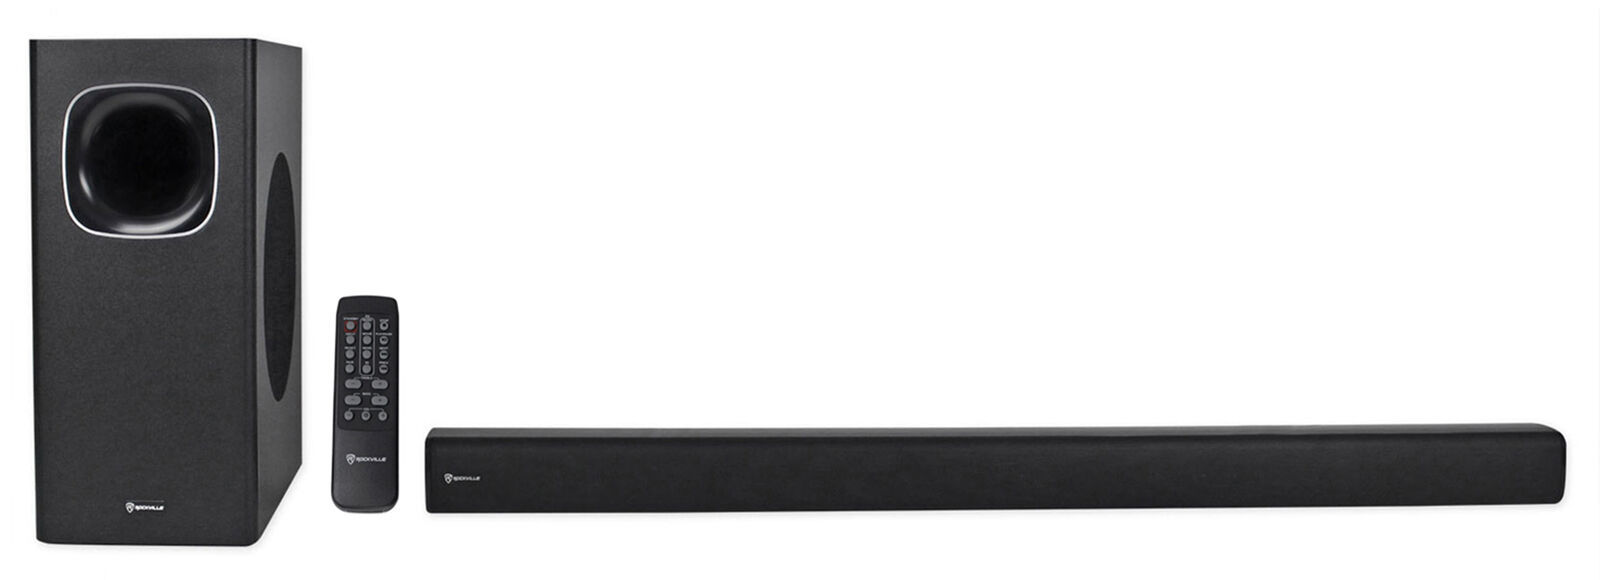 Soundbar+Wireless Subwoofer Home Theater System For Toshiba Smart TV Television - $219.99